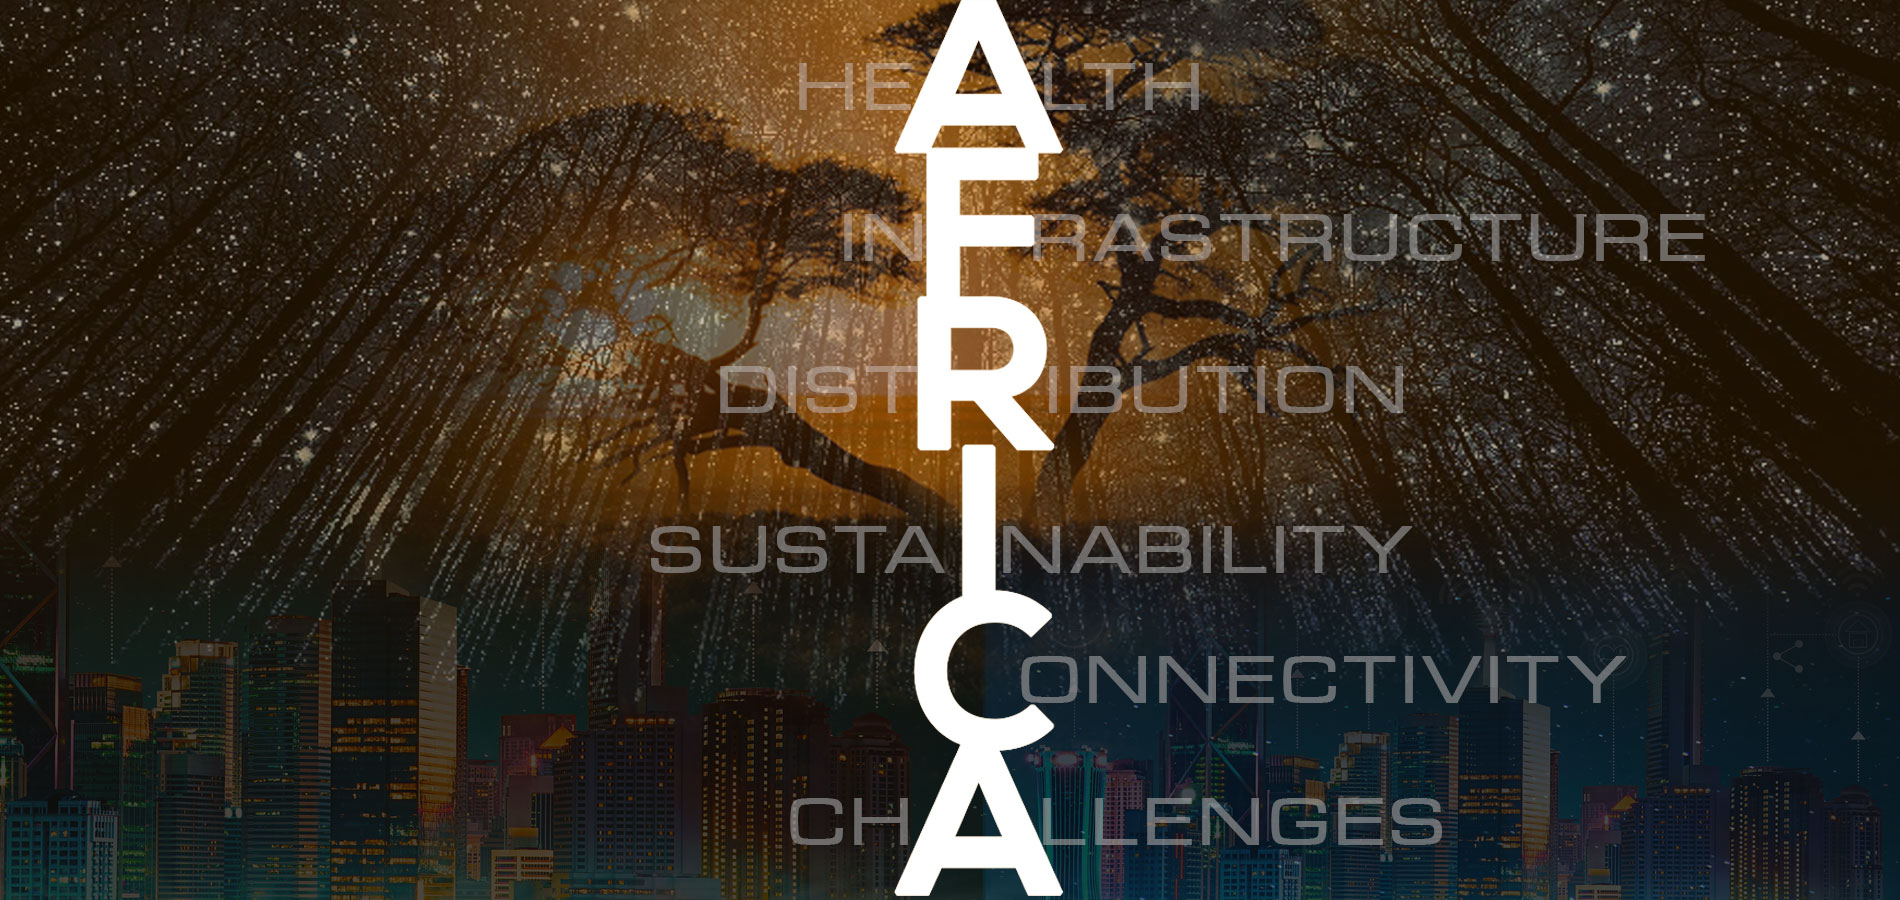 Smart Cities in Africa: Their Rise and The Challenges in Their Construction